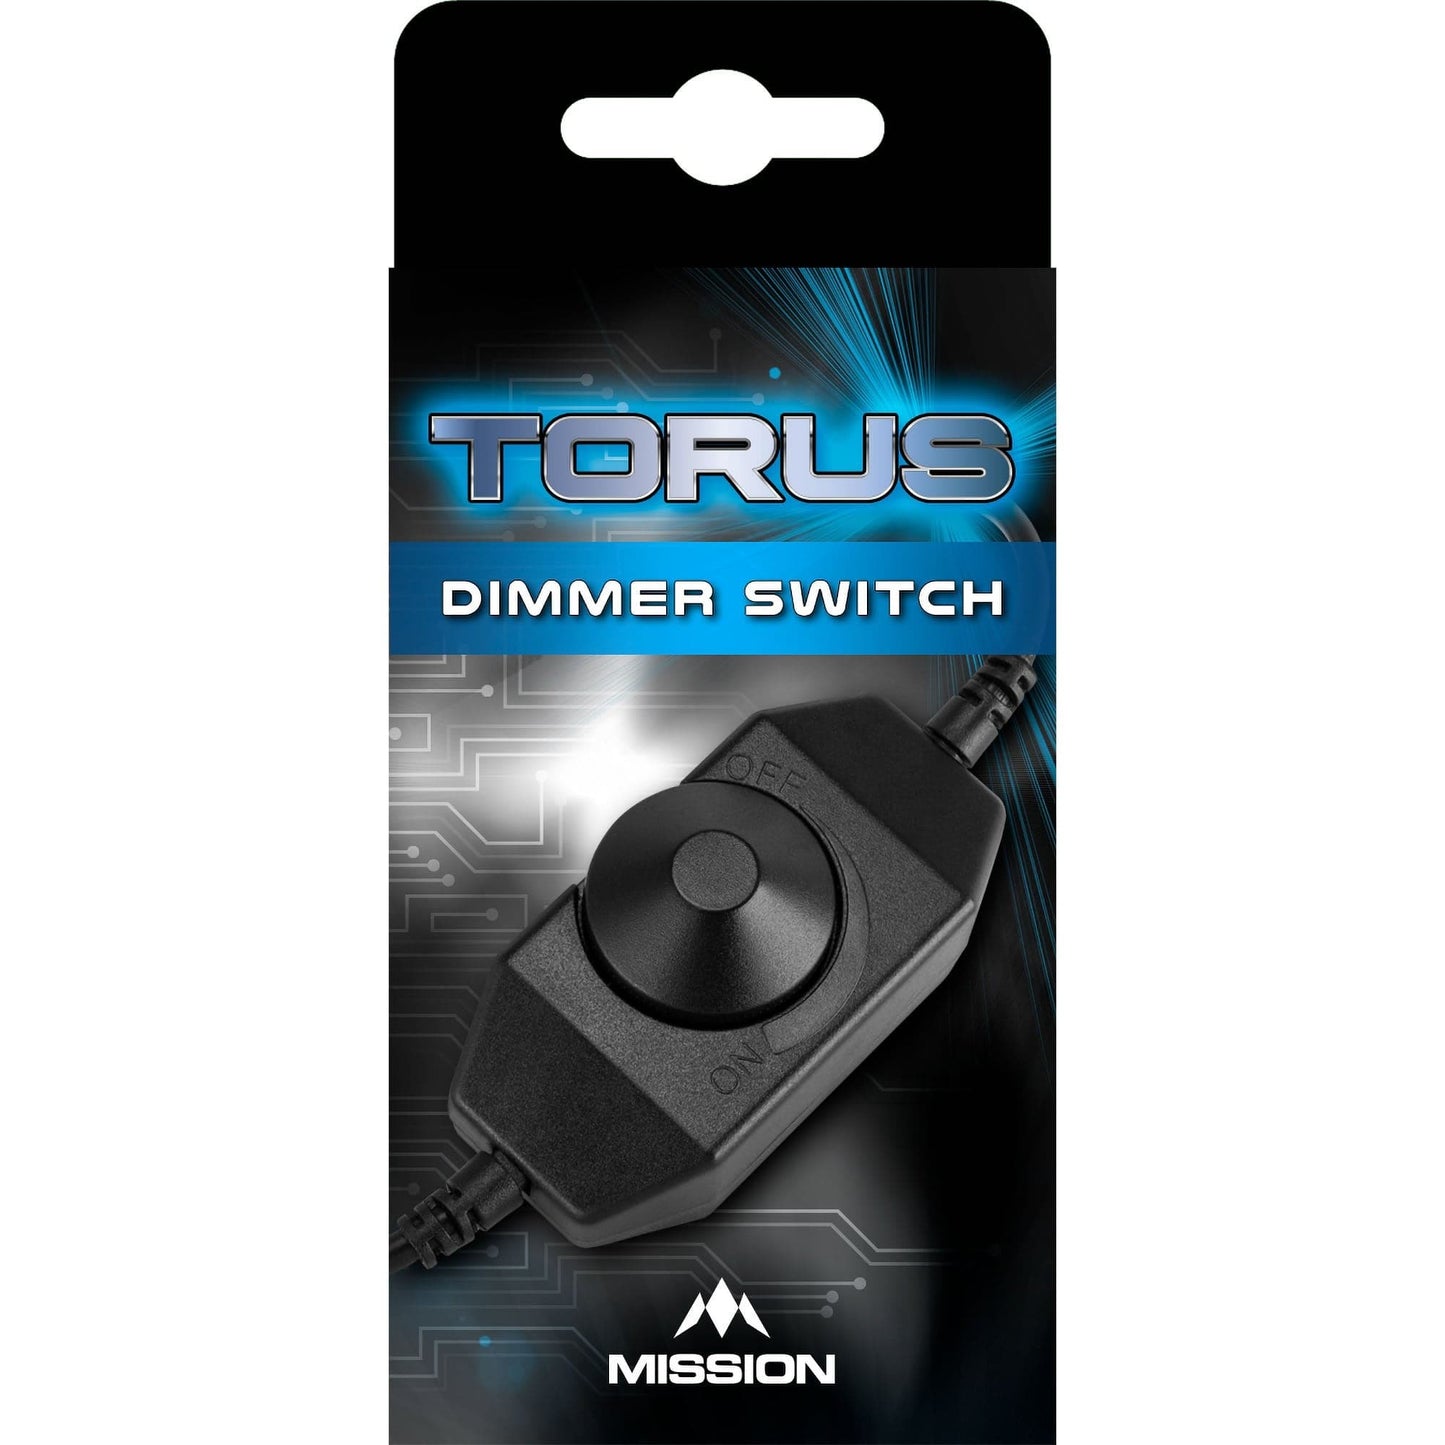 Mission Torus Dimmer Switch - for Lighting Systems - Dimmer